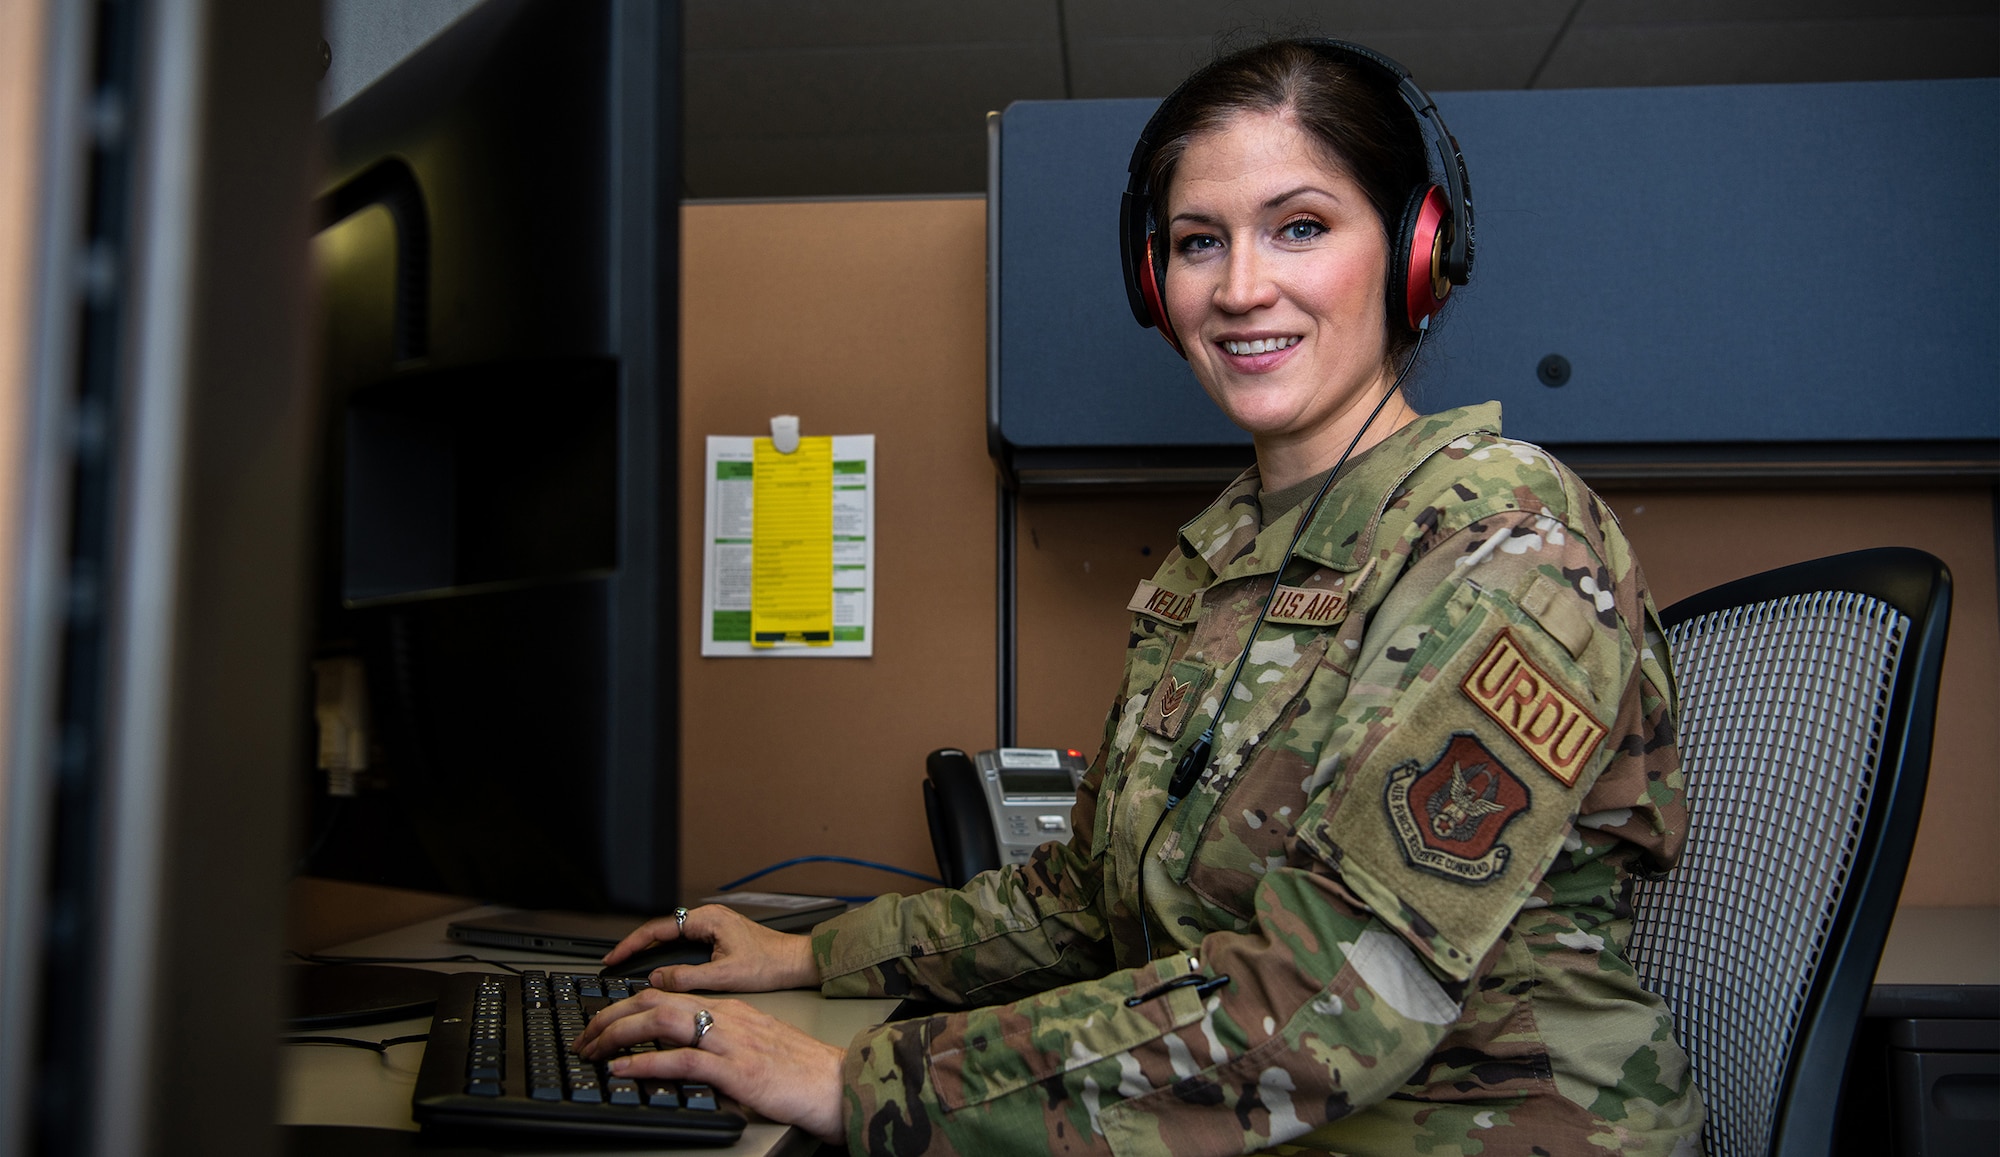 Tech. Sgt. Brianne E. Kelleher, 655th Intelligence, Surveillance, and Reconnaissance Group cryptologic language analyst, is one of 12 Outstanding Airmen of the Year.